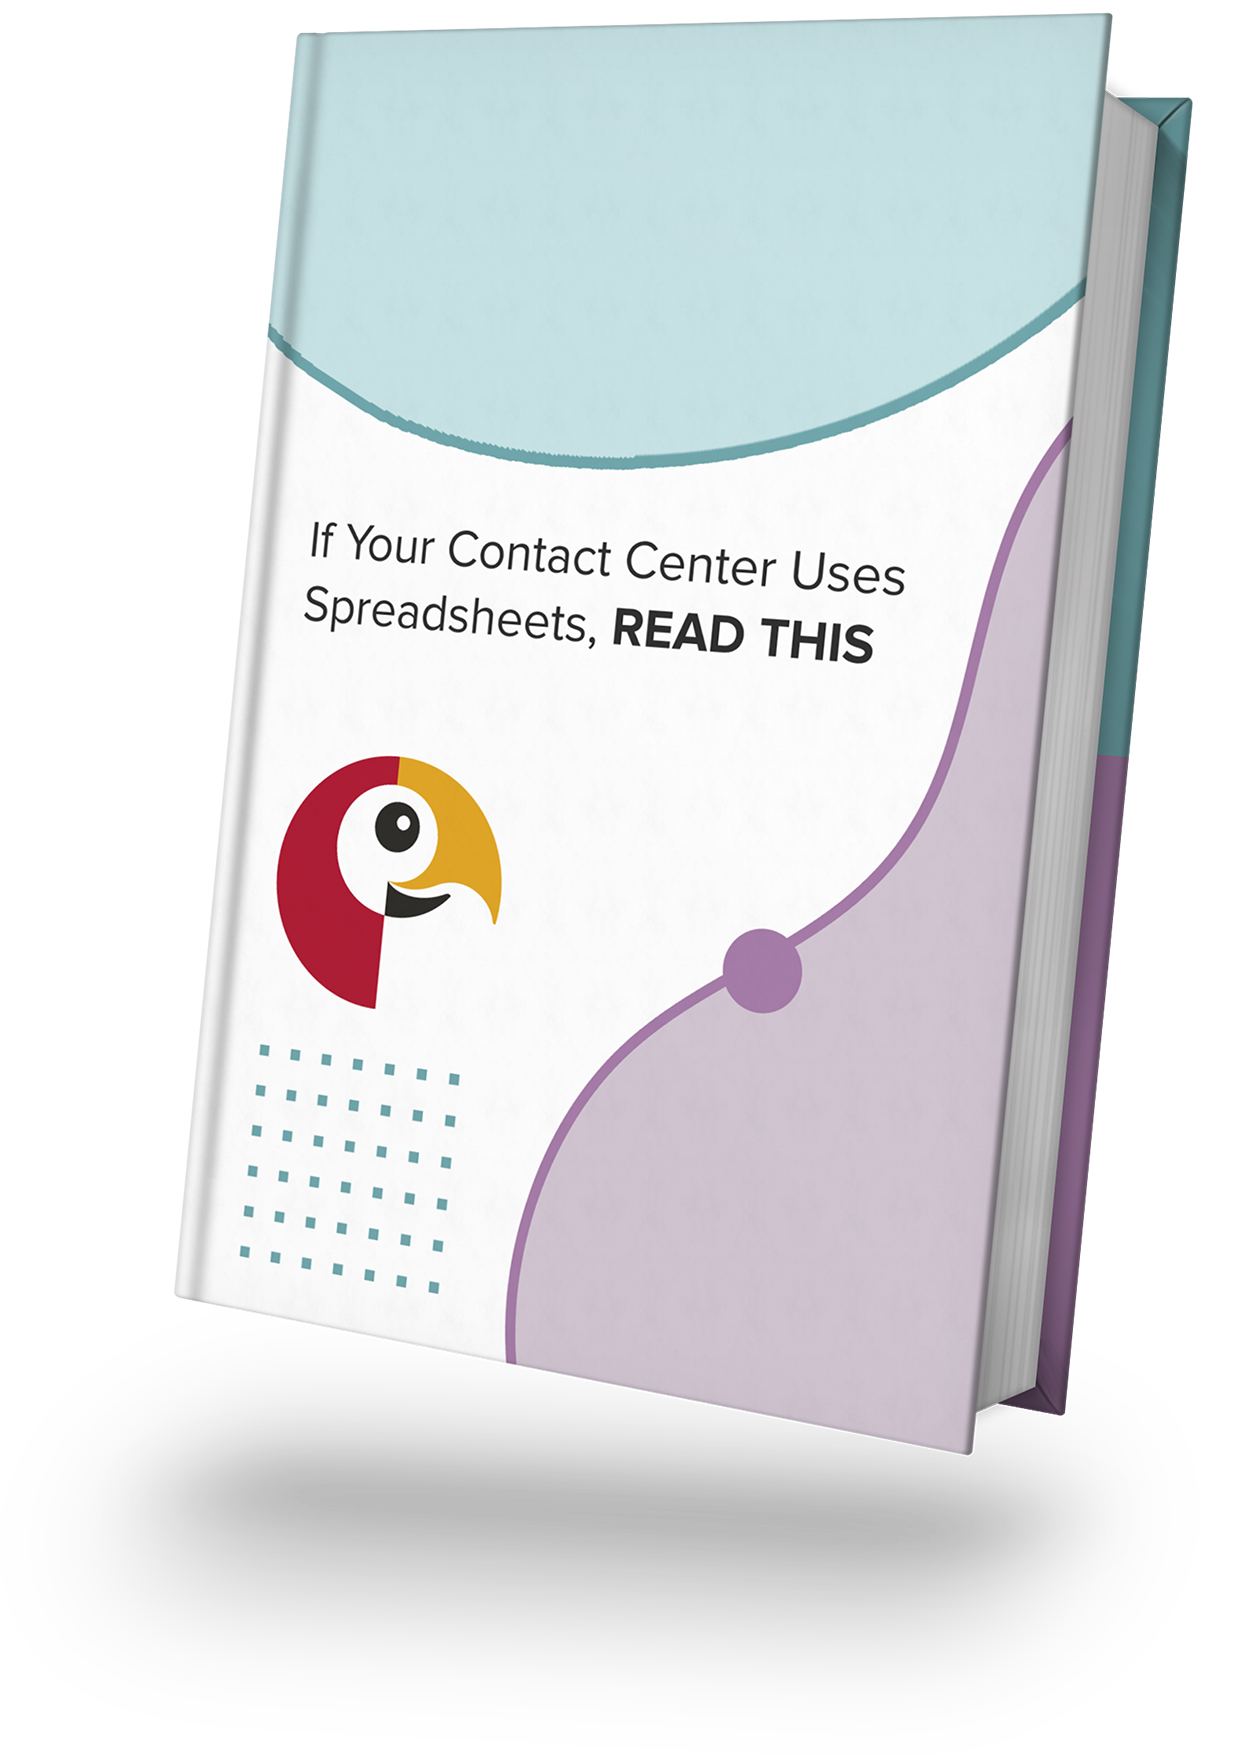 If Your Contact Center Uses Spreadsheets, READ THIS book